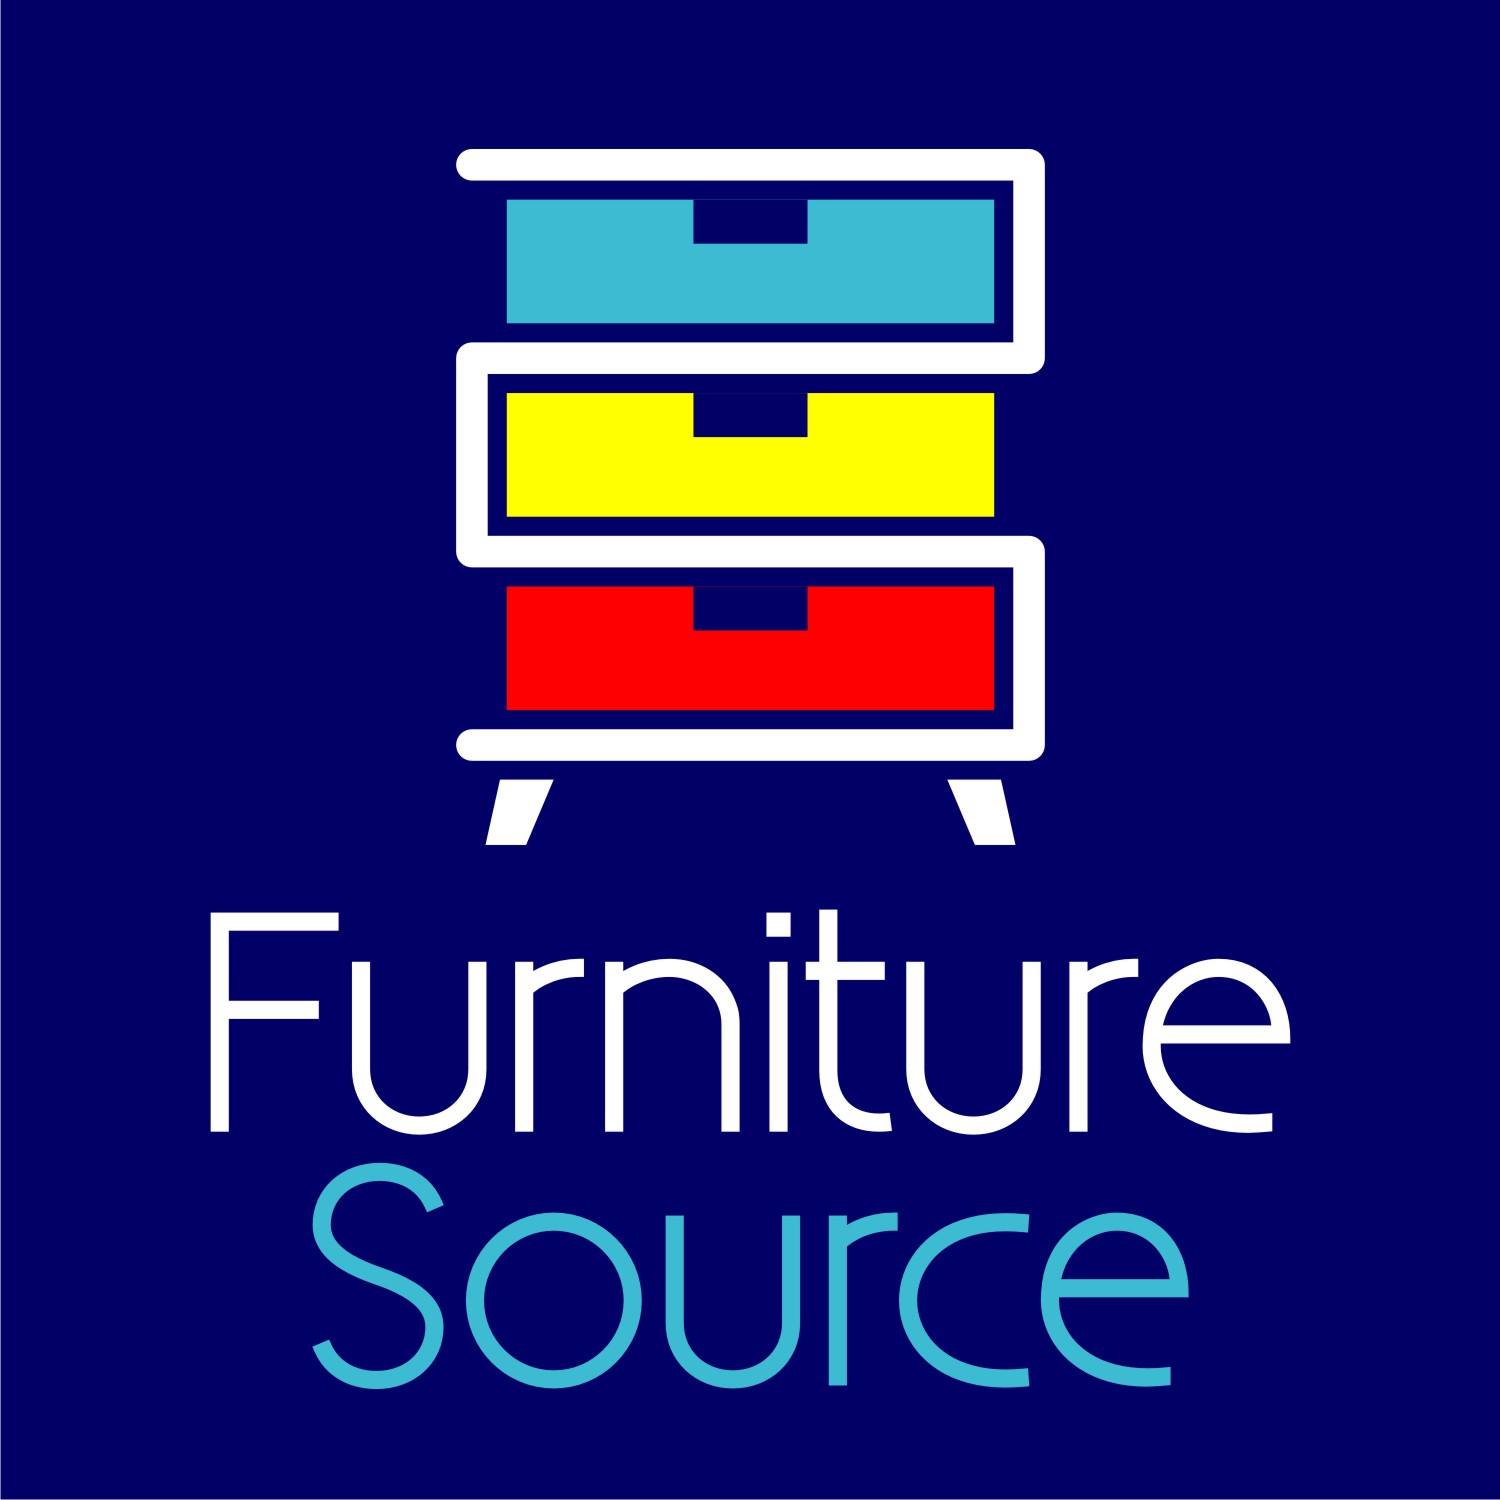 Furniture Source Philippines Multipurpose Furniture For Your Home